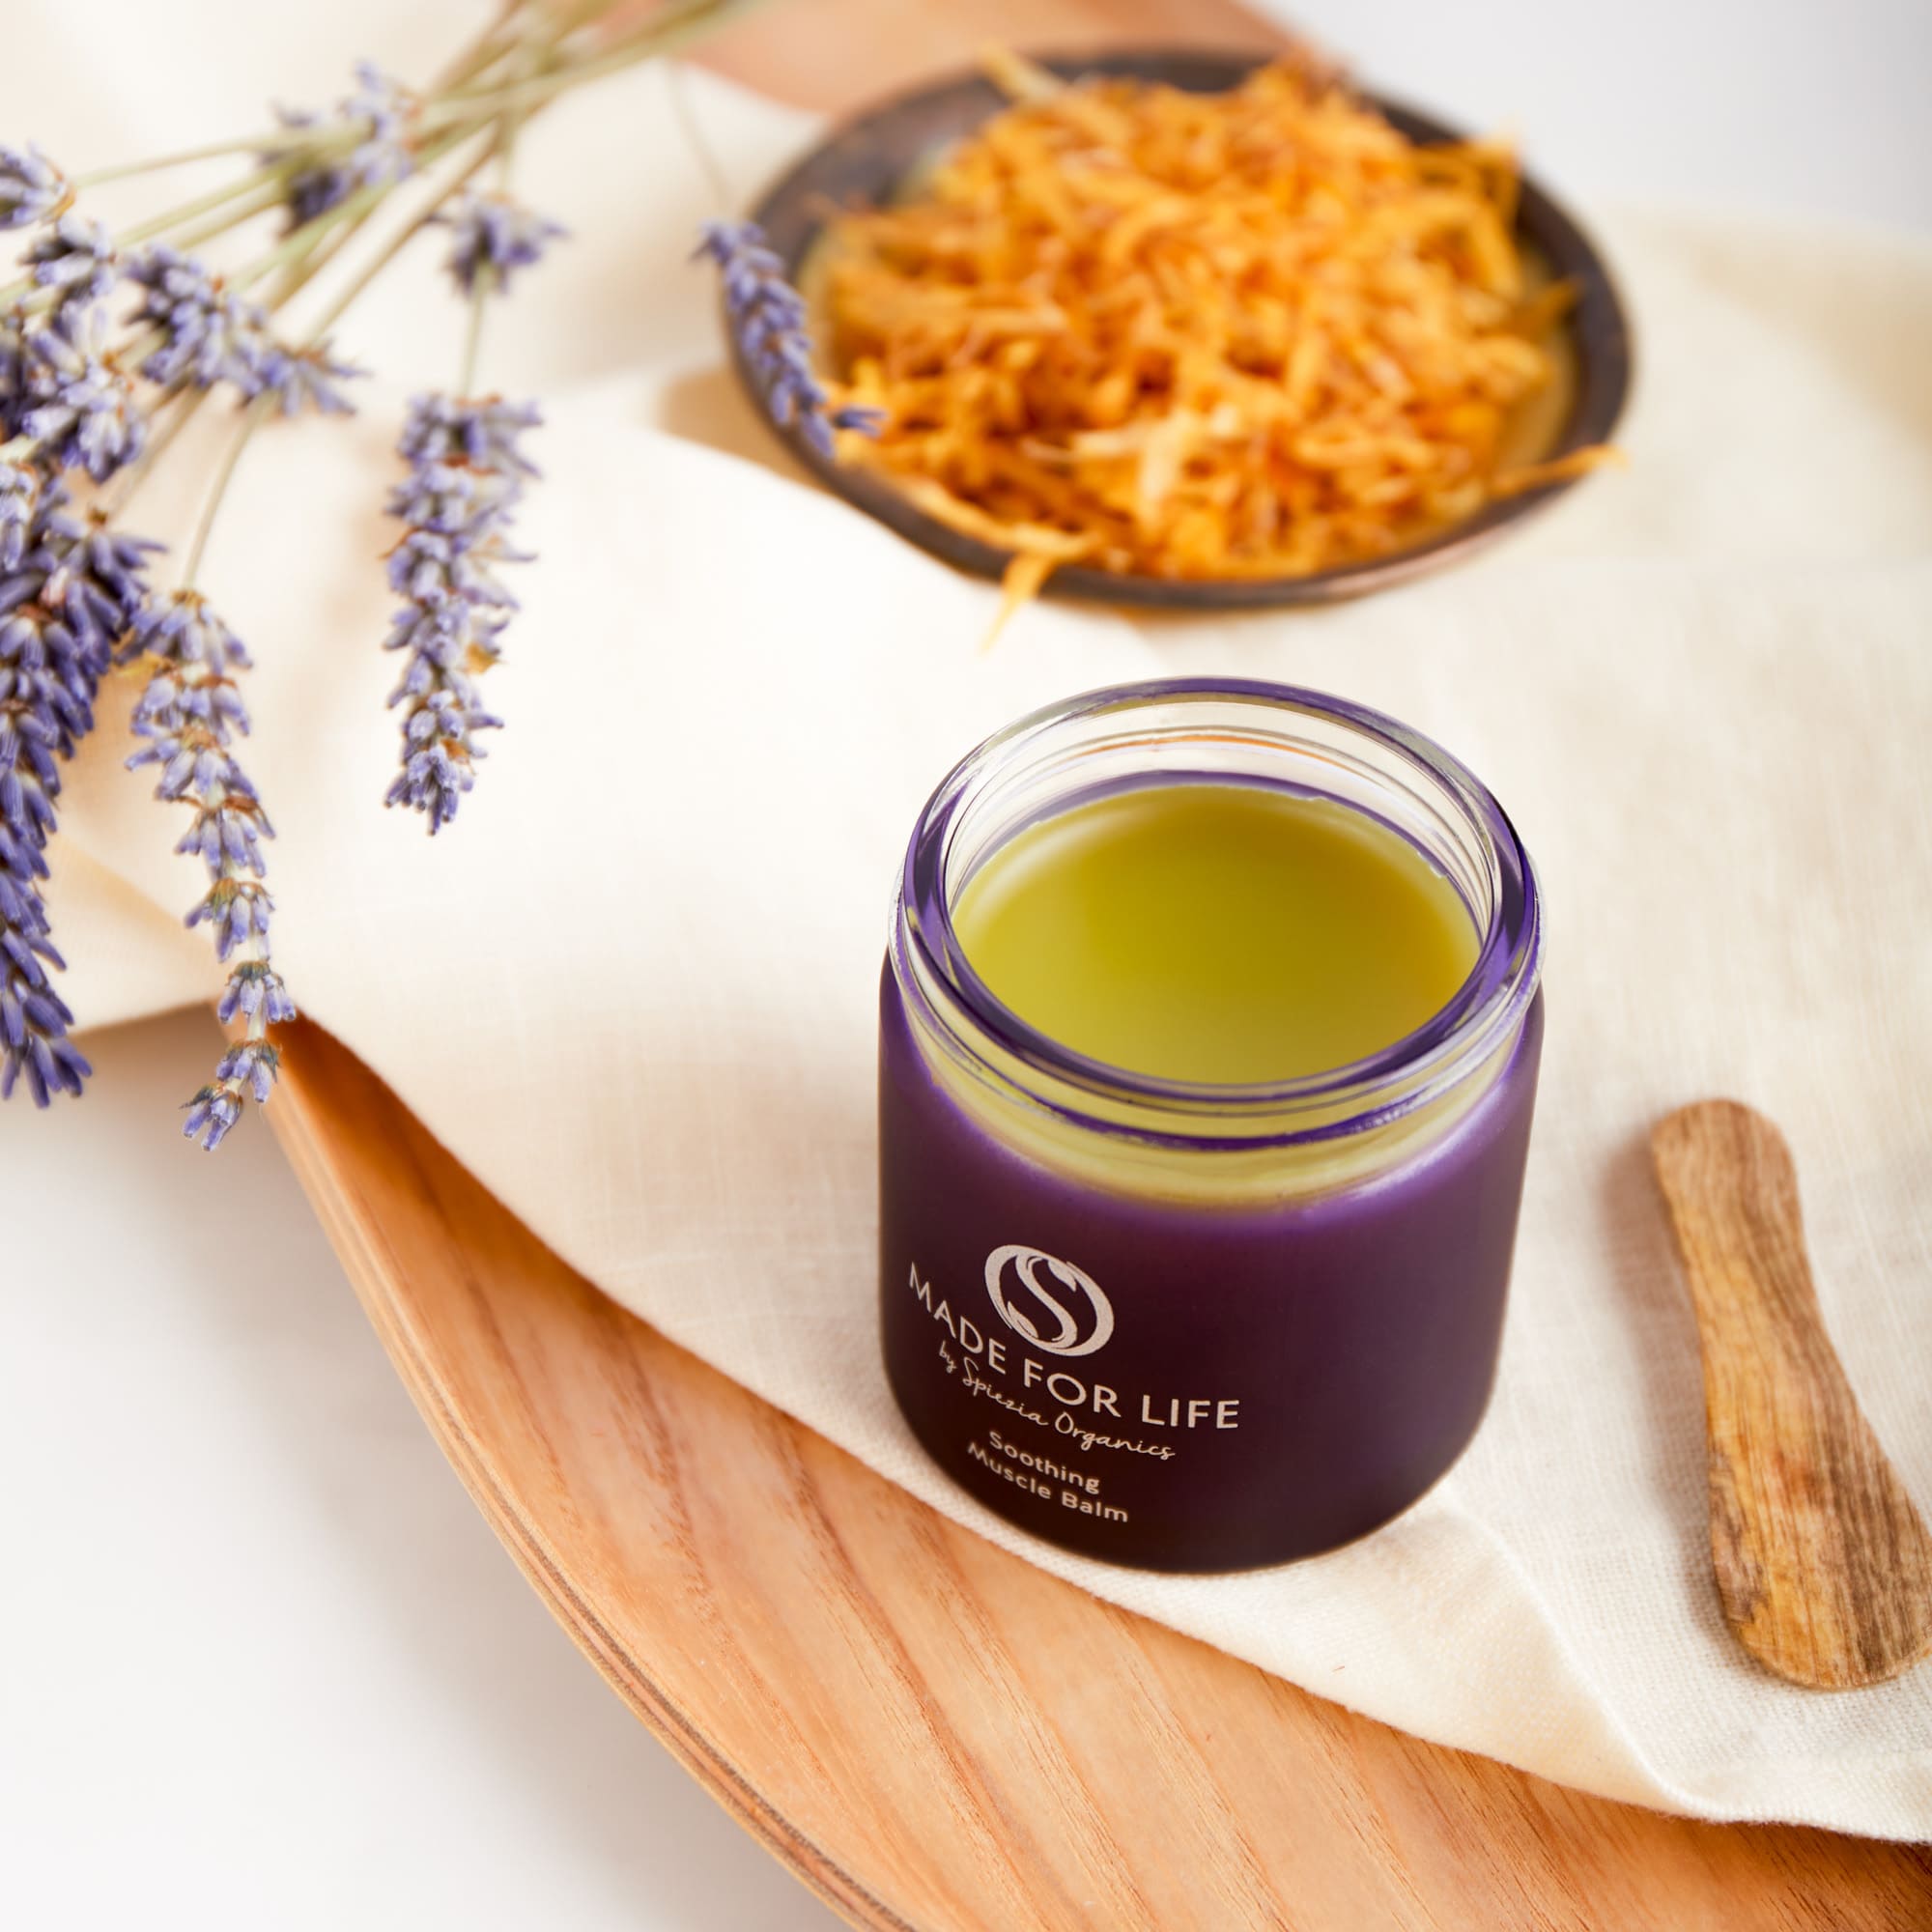 Soothing Muscle Balm 50ml